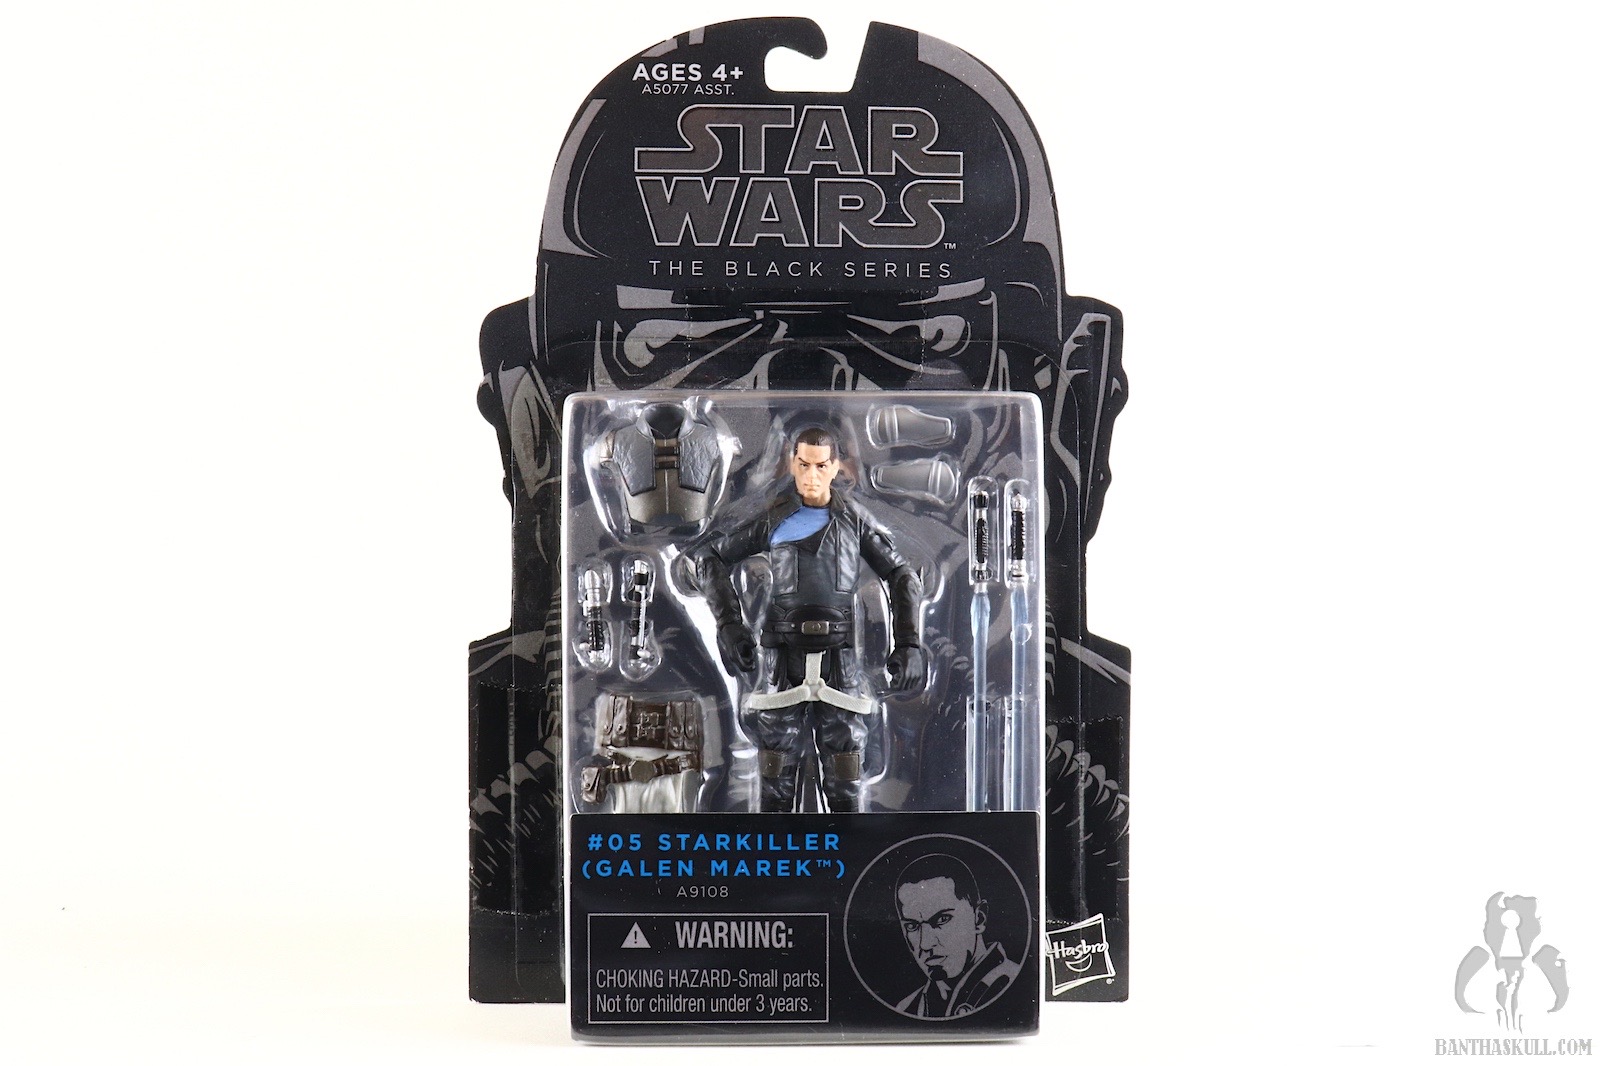 REVIEW AND PHOTO GALLERY: Star Wars The Black Series TBS2 #05 - Starkiller (Galen  Marek) - #05 2014